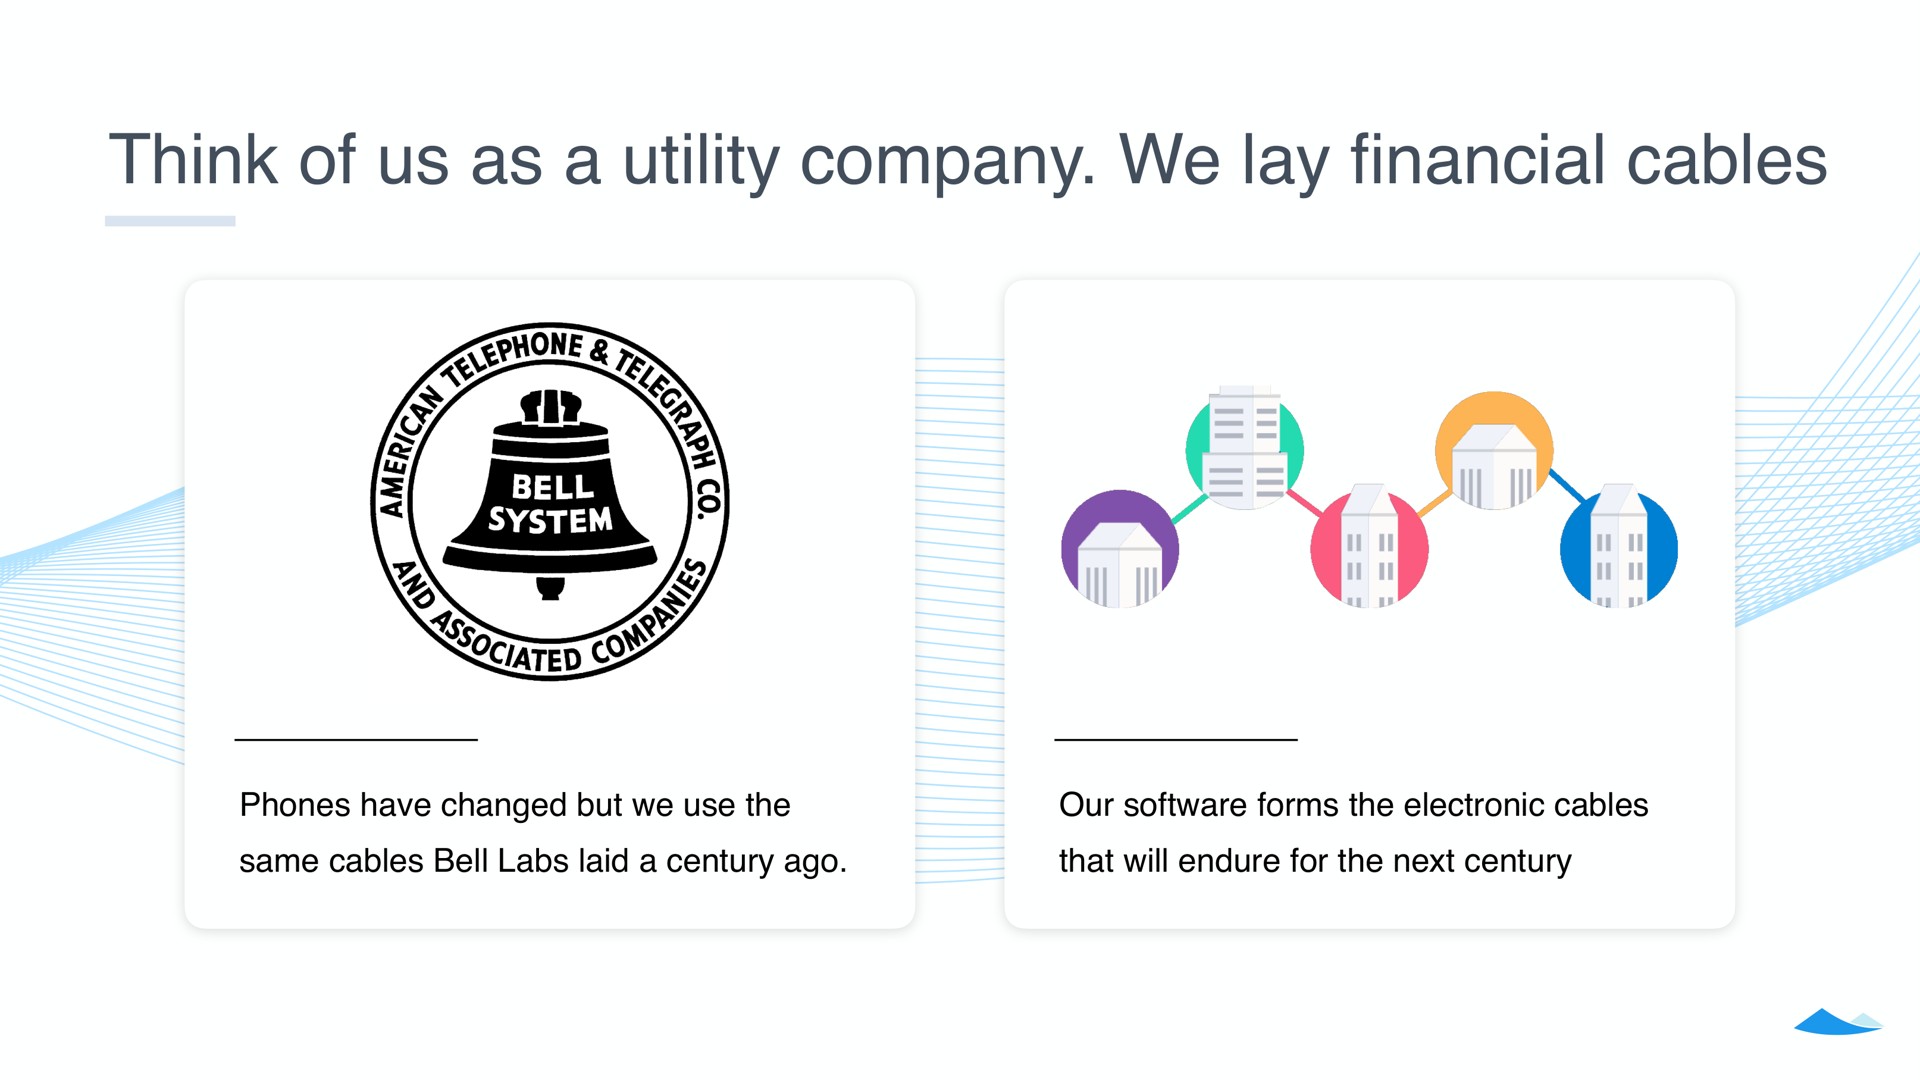 think of us as a utility company we lay cables financial phones have changed but use the our forms the electronic same bell labs laid century ago that will endure for the next century | Carta